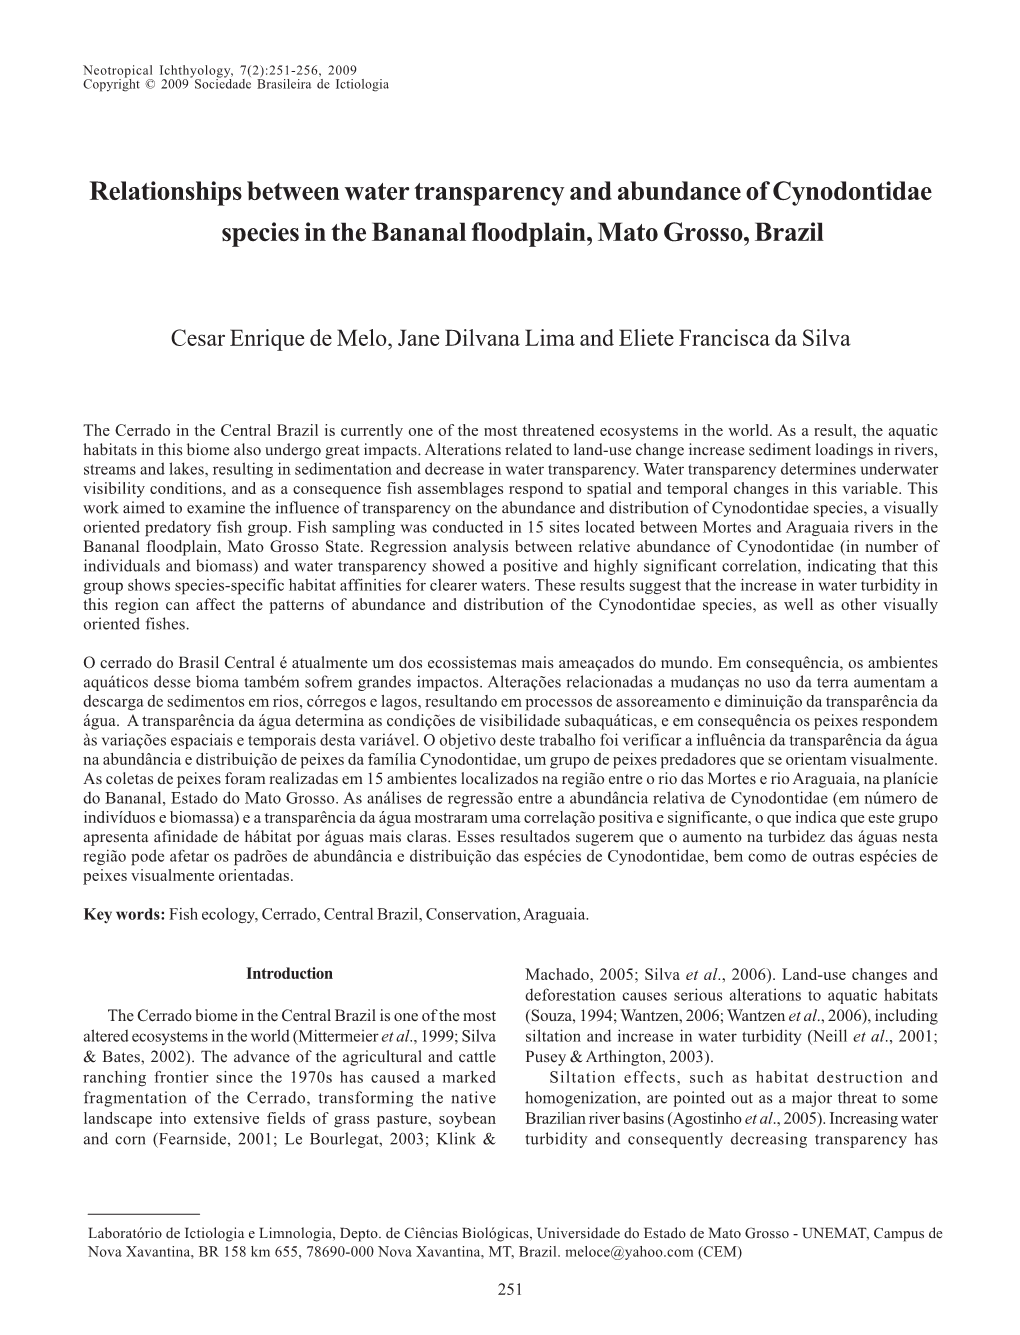 Relationships Between Water Transparency and Abundance of Cynodontidae Species in the Bananal Floodplain, Mato Grosso, Brazil